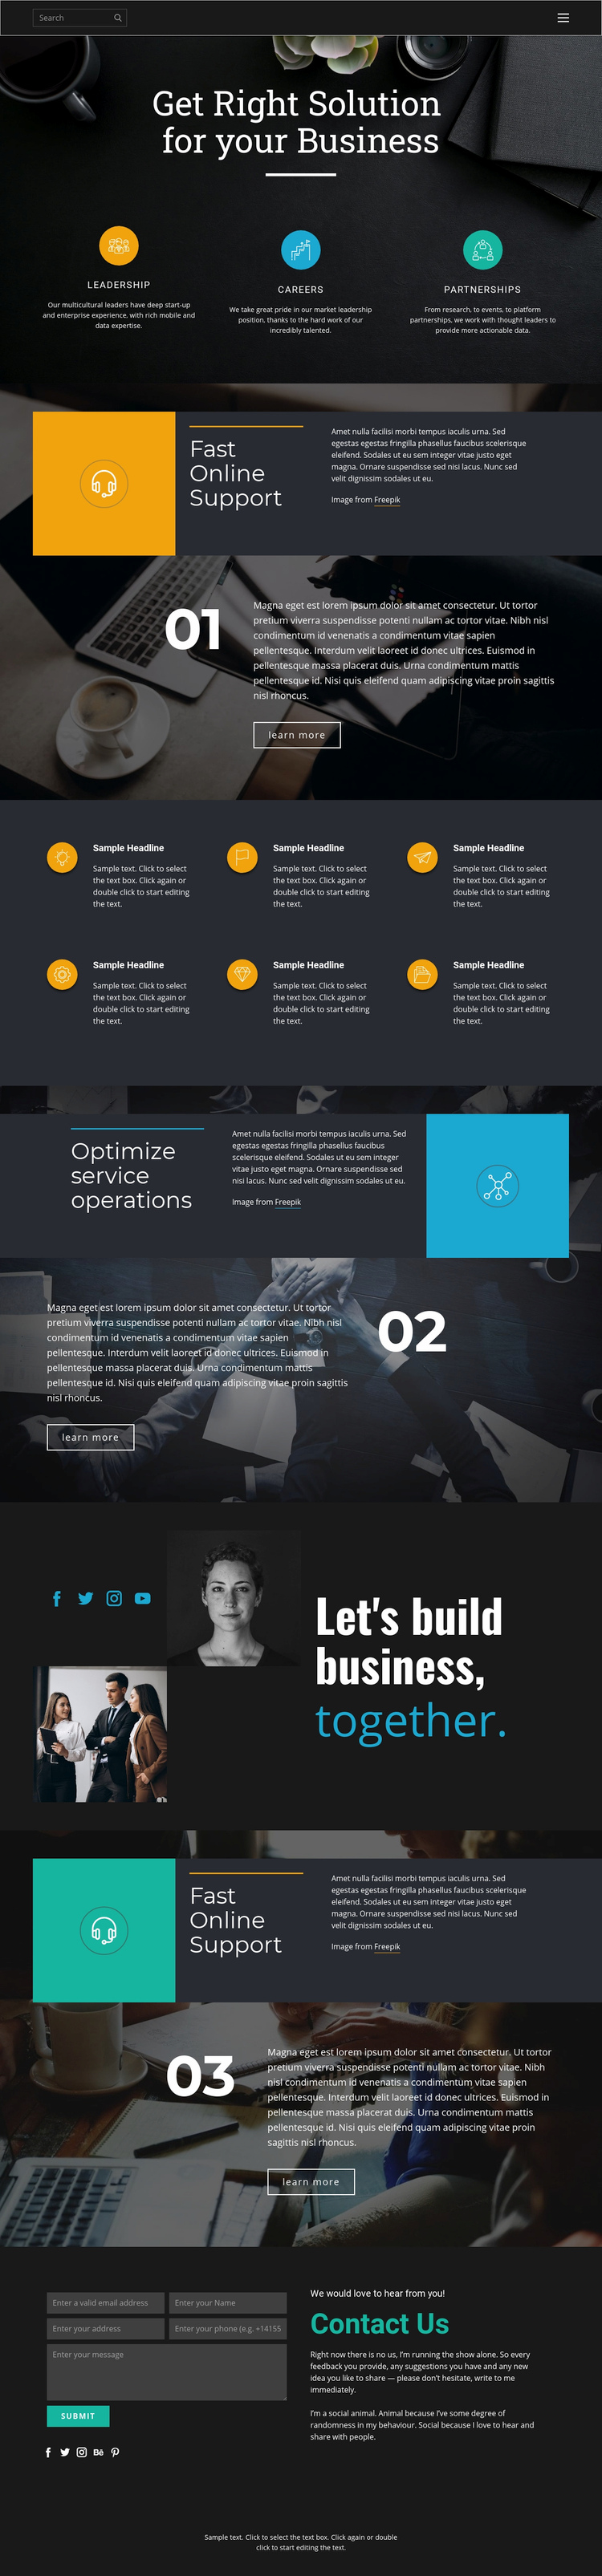 Right solutions for business Squarespace Template Alternative